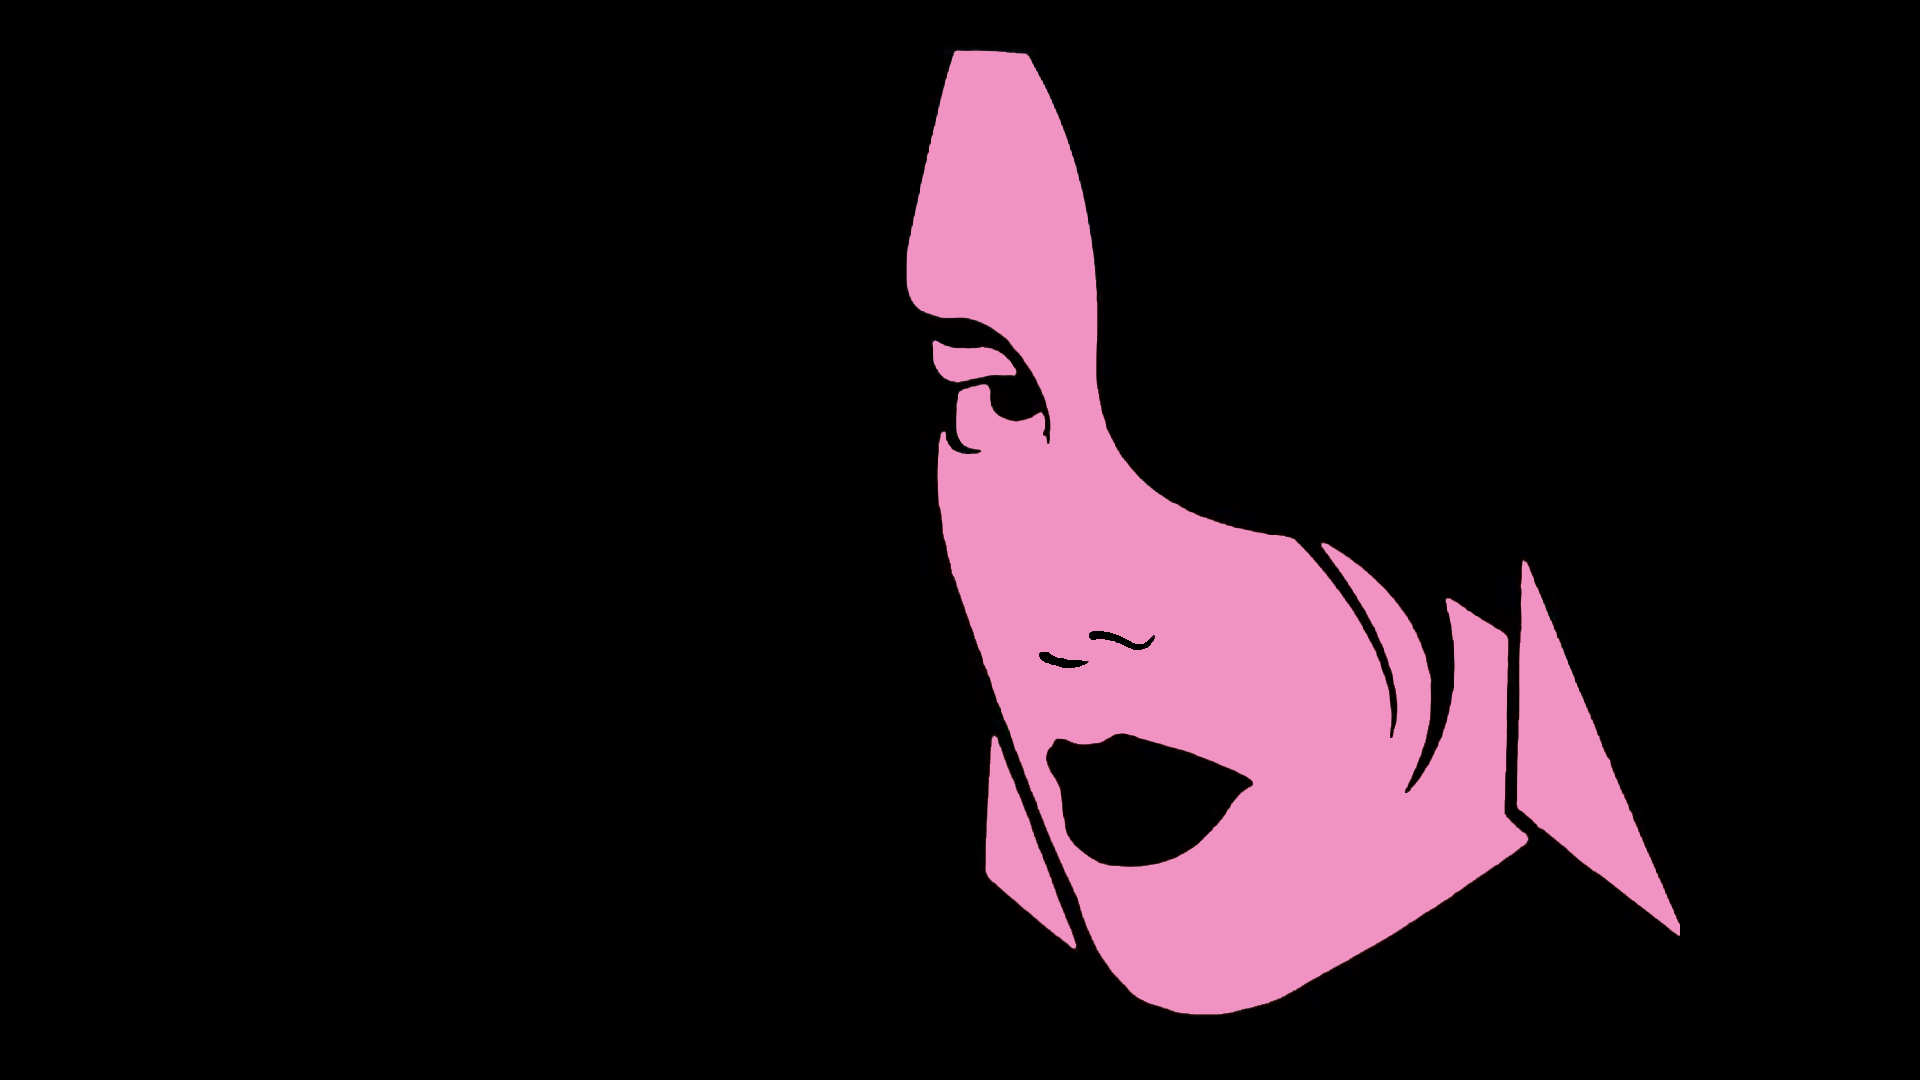 Grand Theft Auto Vice City Minimalism Simple Background Pink Face Illustration Women Rockstar Games  1920x1080